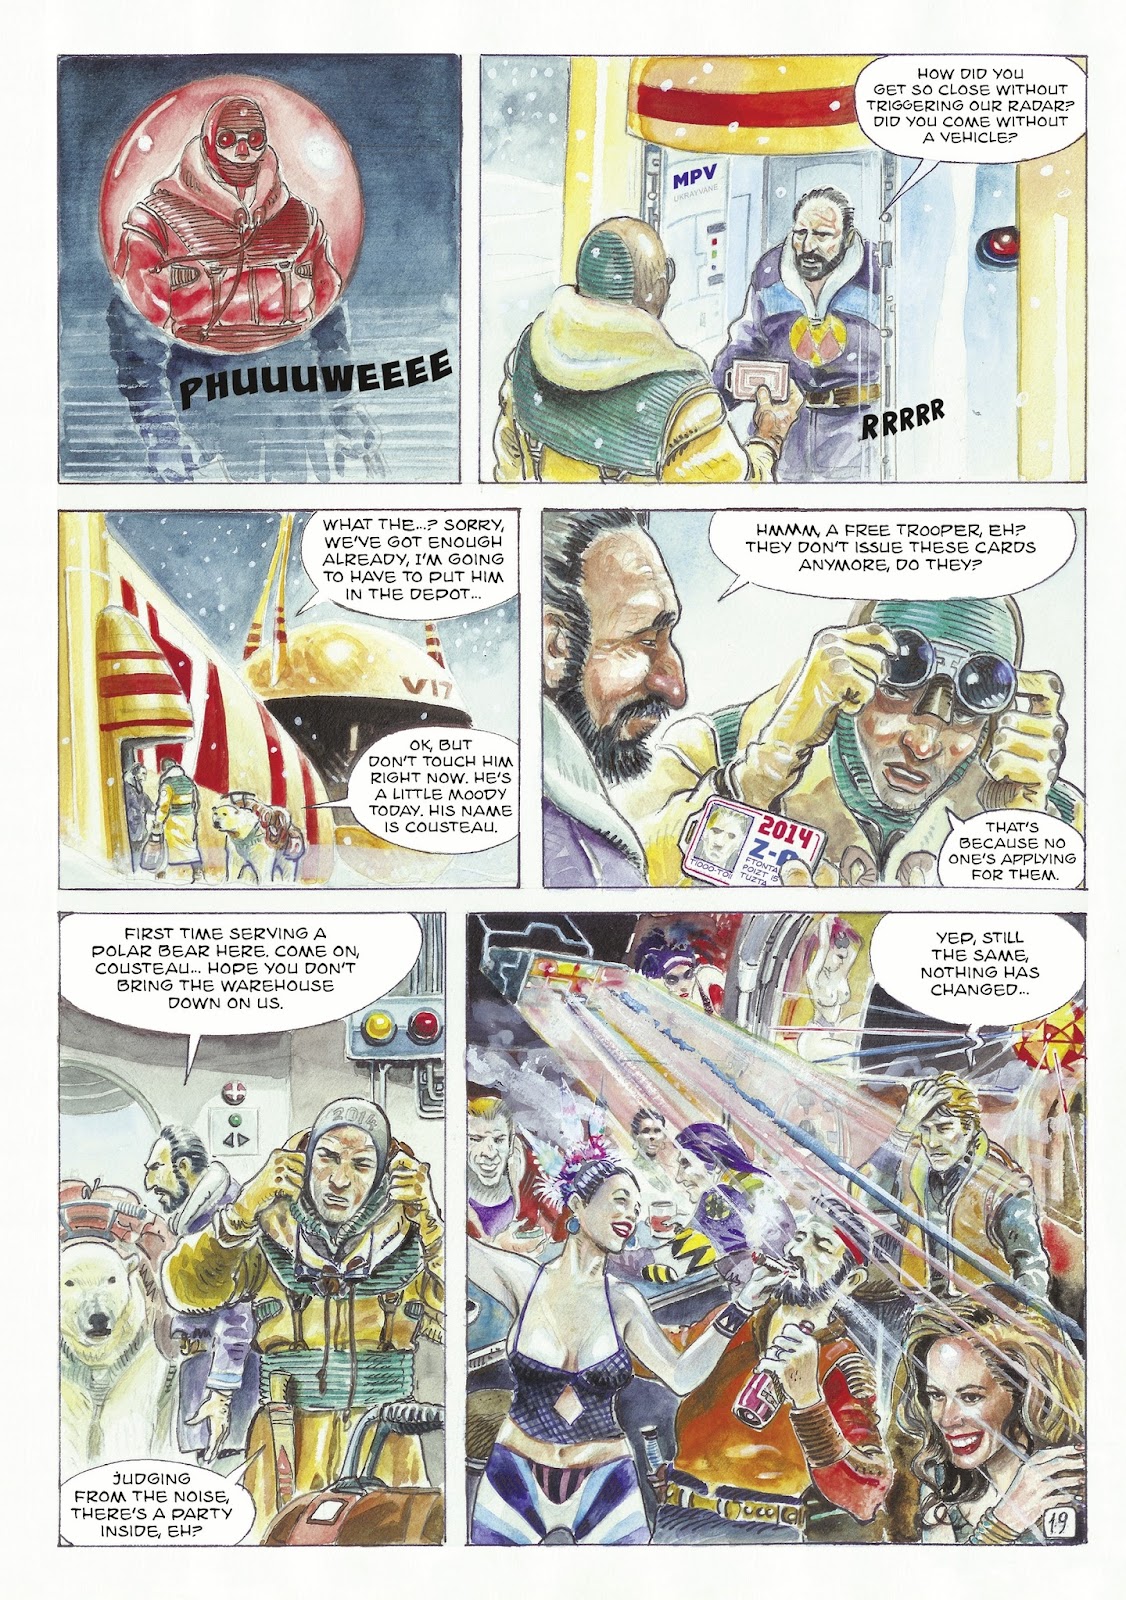 The Man With the Bear issue 1 - Page 21